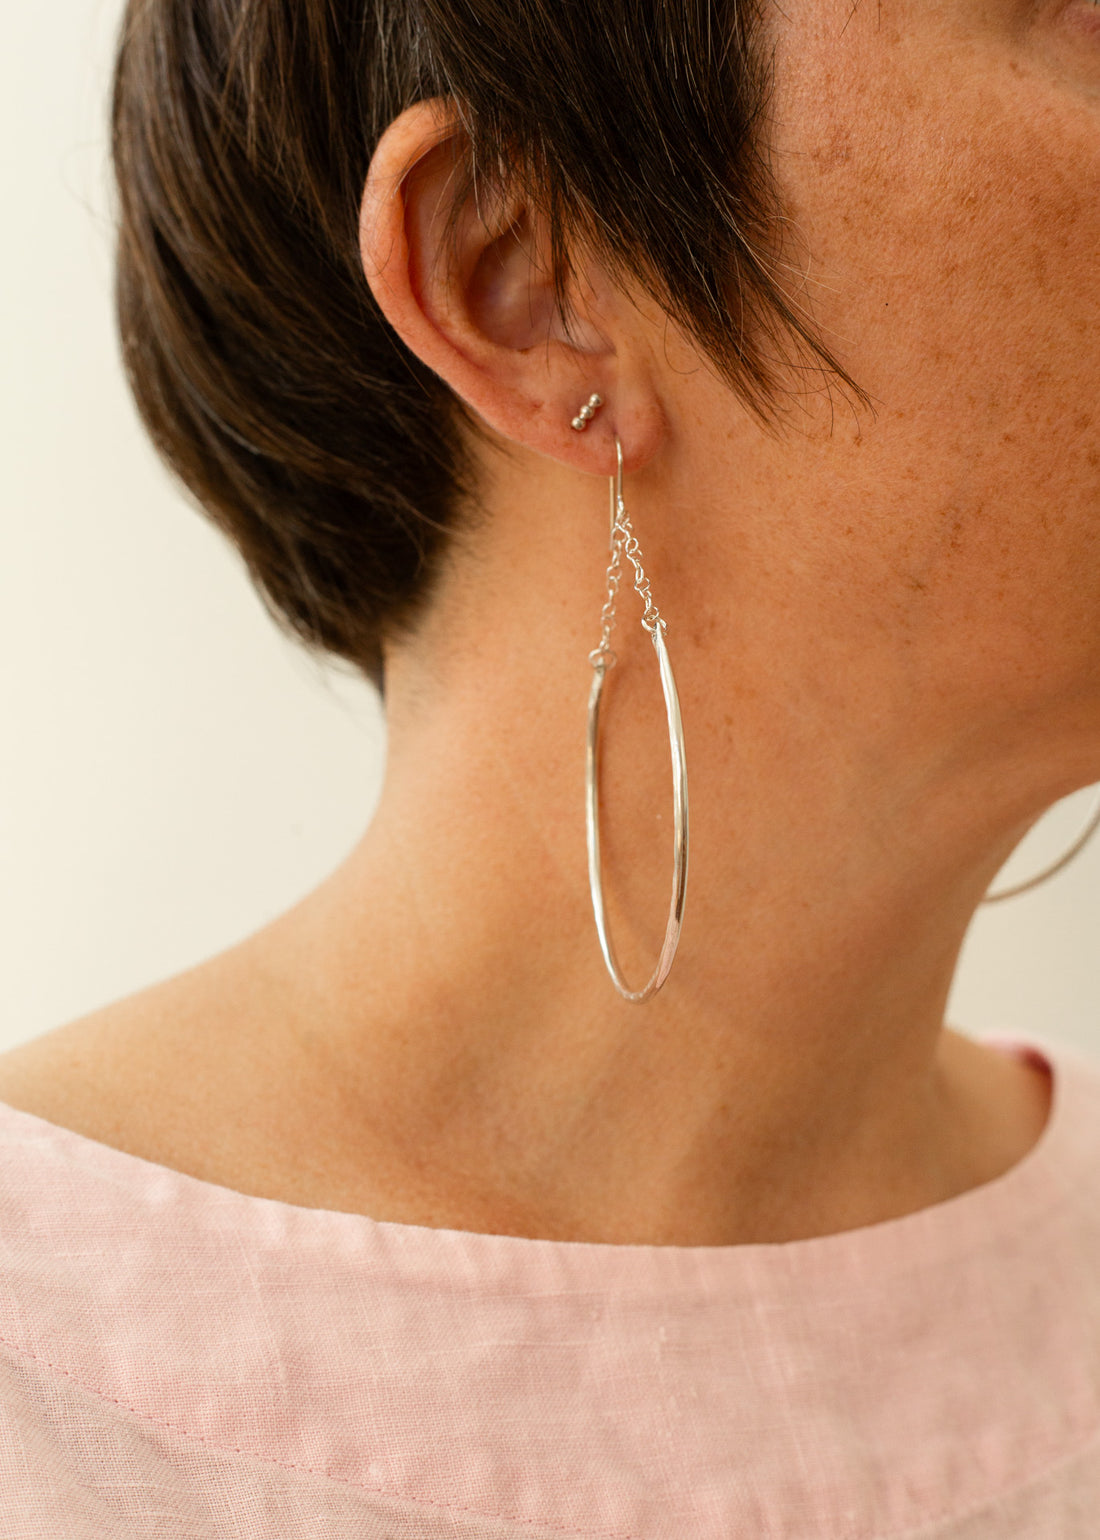 crescent-shaped earring with chain link accents hanging on a models ear